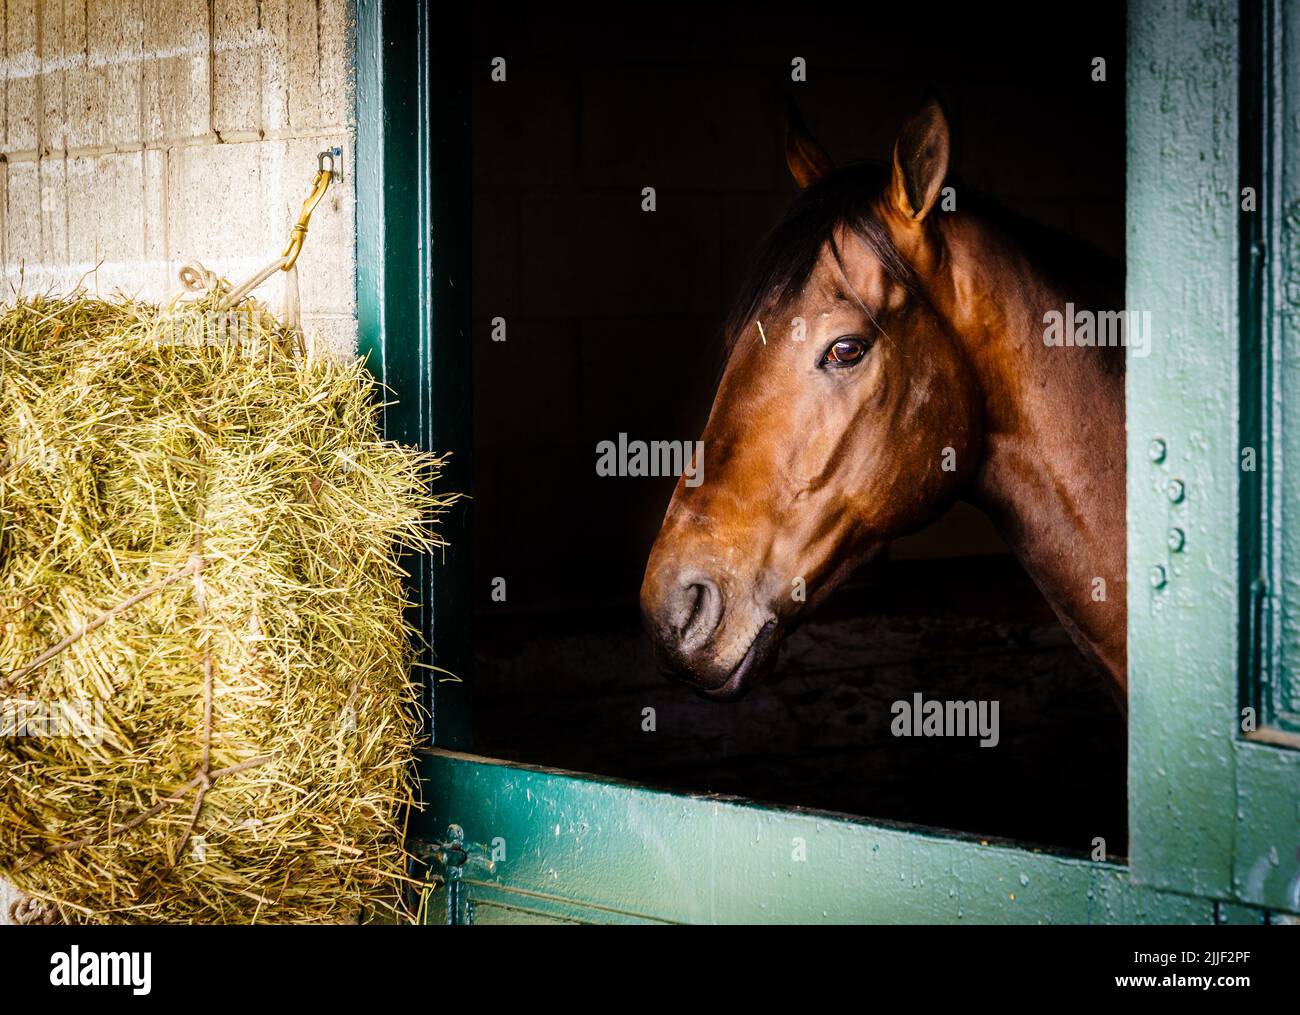 Thoroughbred race horse in a stable in Lexington, Kentucky Stock Photo